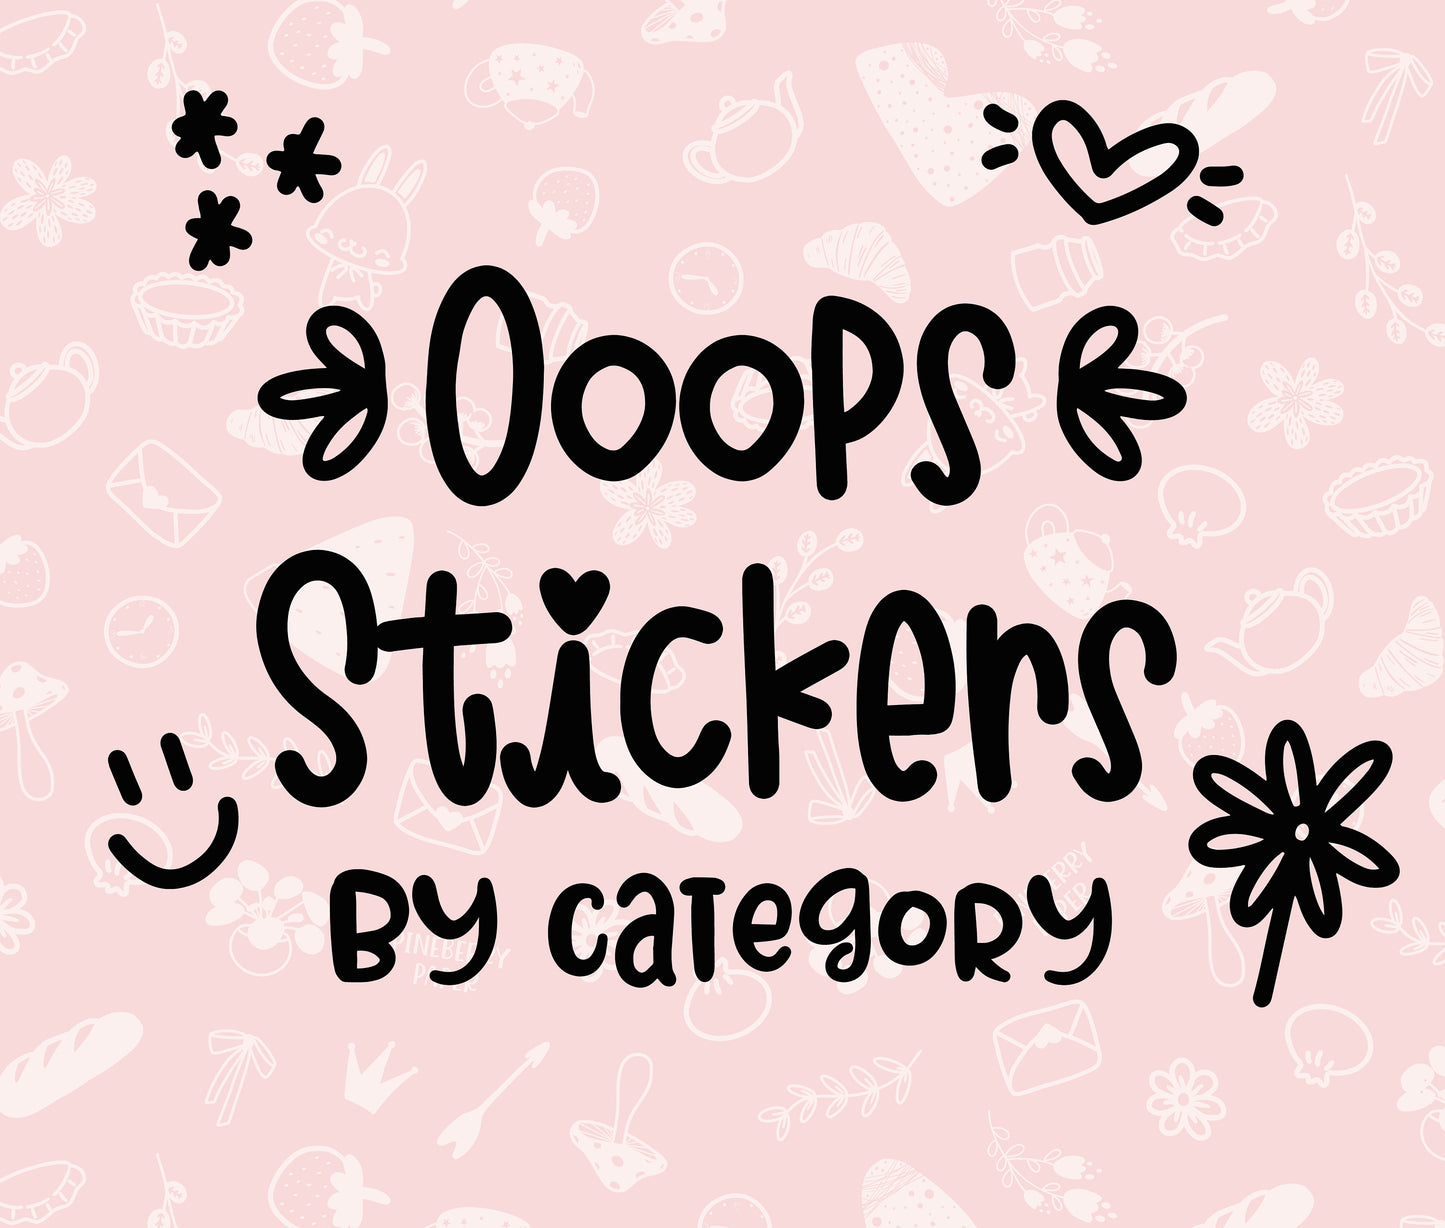 Ooops Sticker by Category | Imperfect | Miscut | Misfit | 5 or 10 sheet packs available